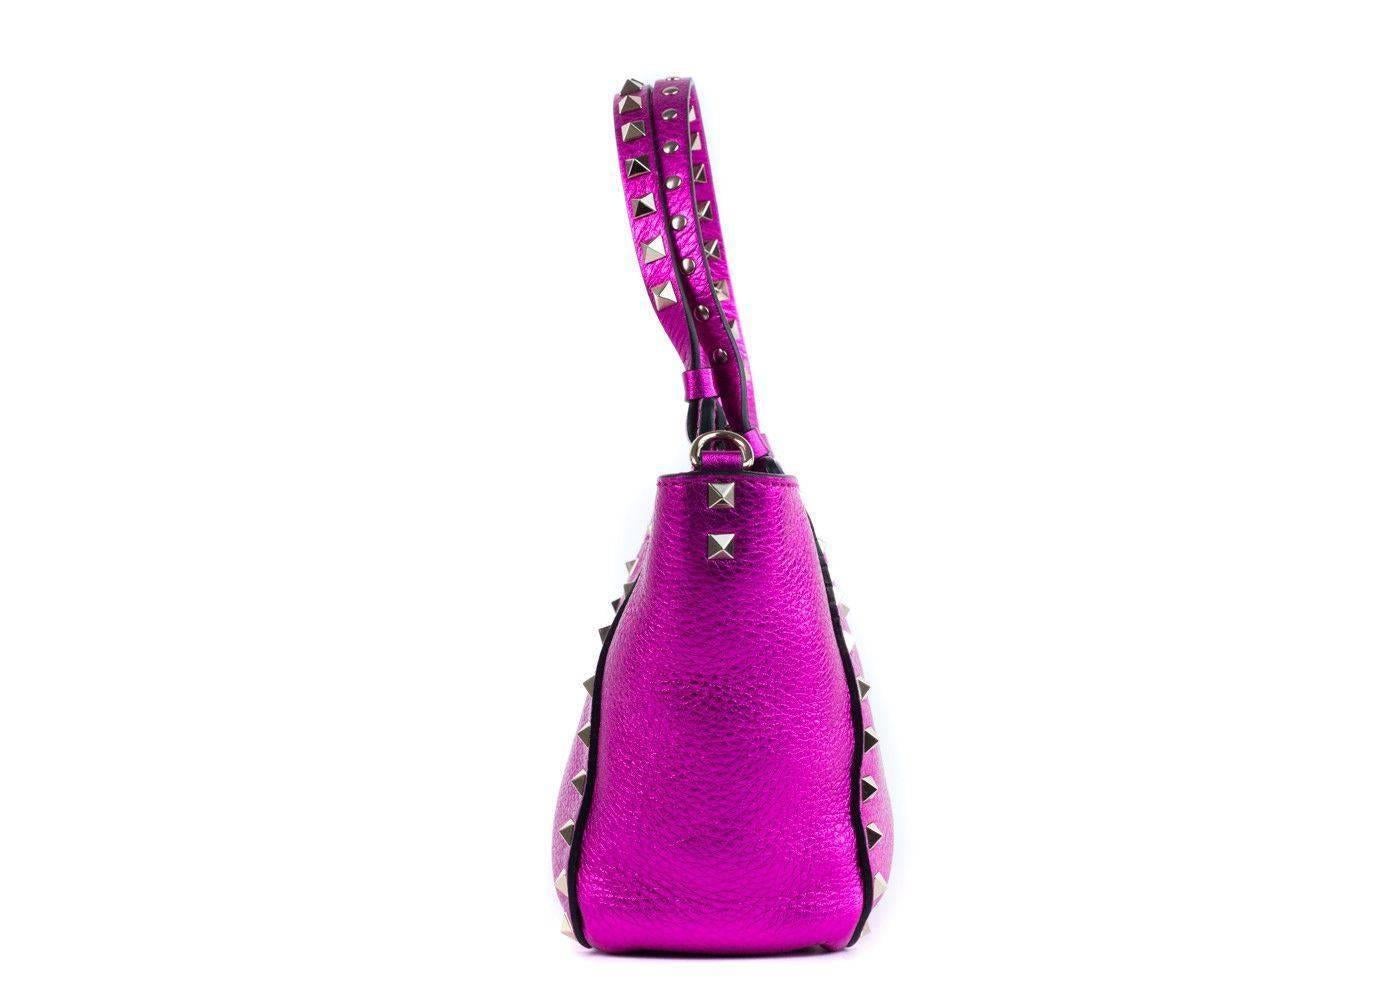 Brand New Valentino Tote Bag
Original Tags & Dust Bag Included
Retails in Stores & Online for $2034
Considered as a size Mini

Gorgeous hot pink Valentino tote in their signature rockstud silhouette. Perfect for this summer season to shine